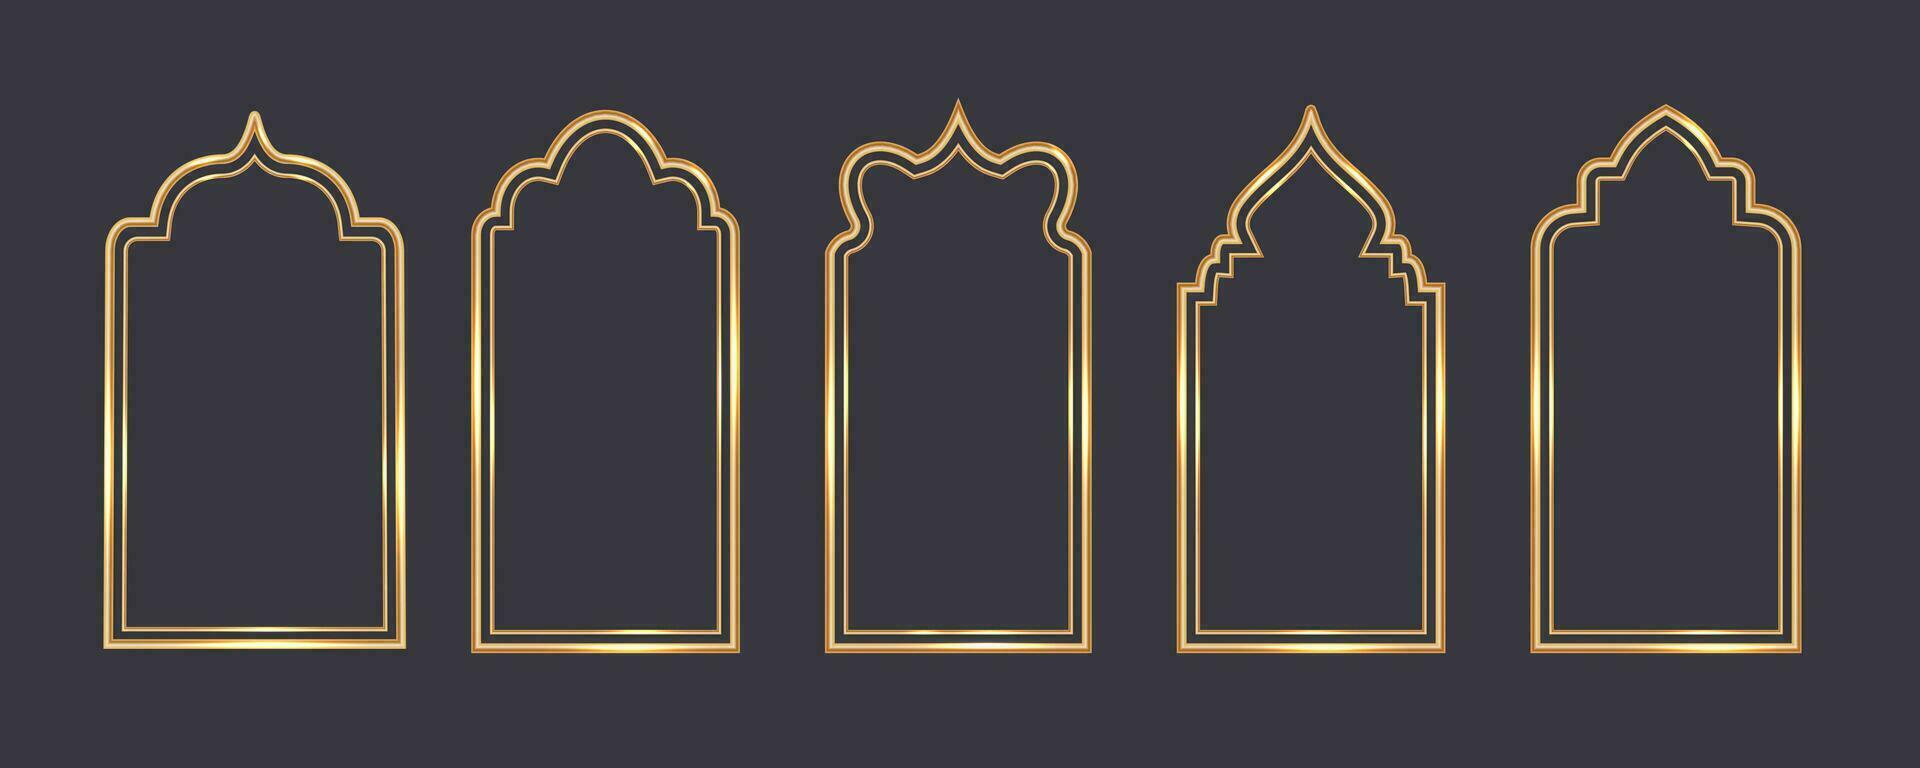 Ramadan window frame shapes. Islamic golden arches. Muslim mosque elements of architecture with ornament. Turkish gates and doors set. Vector